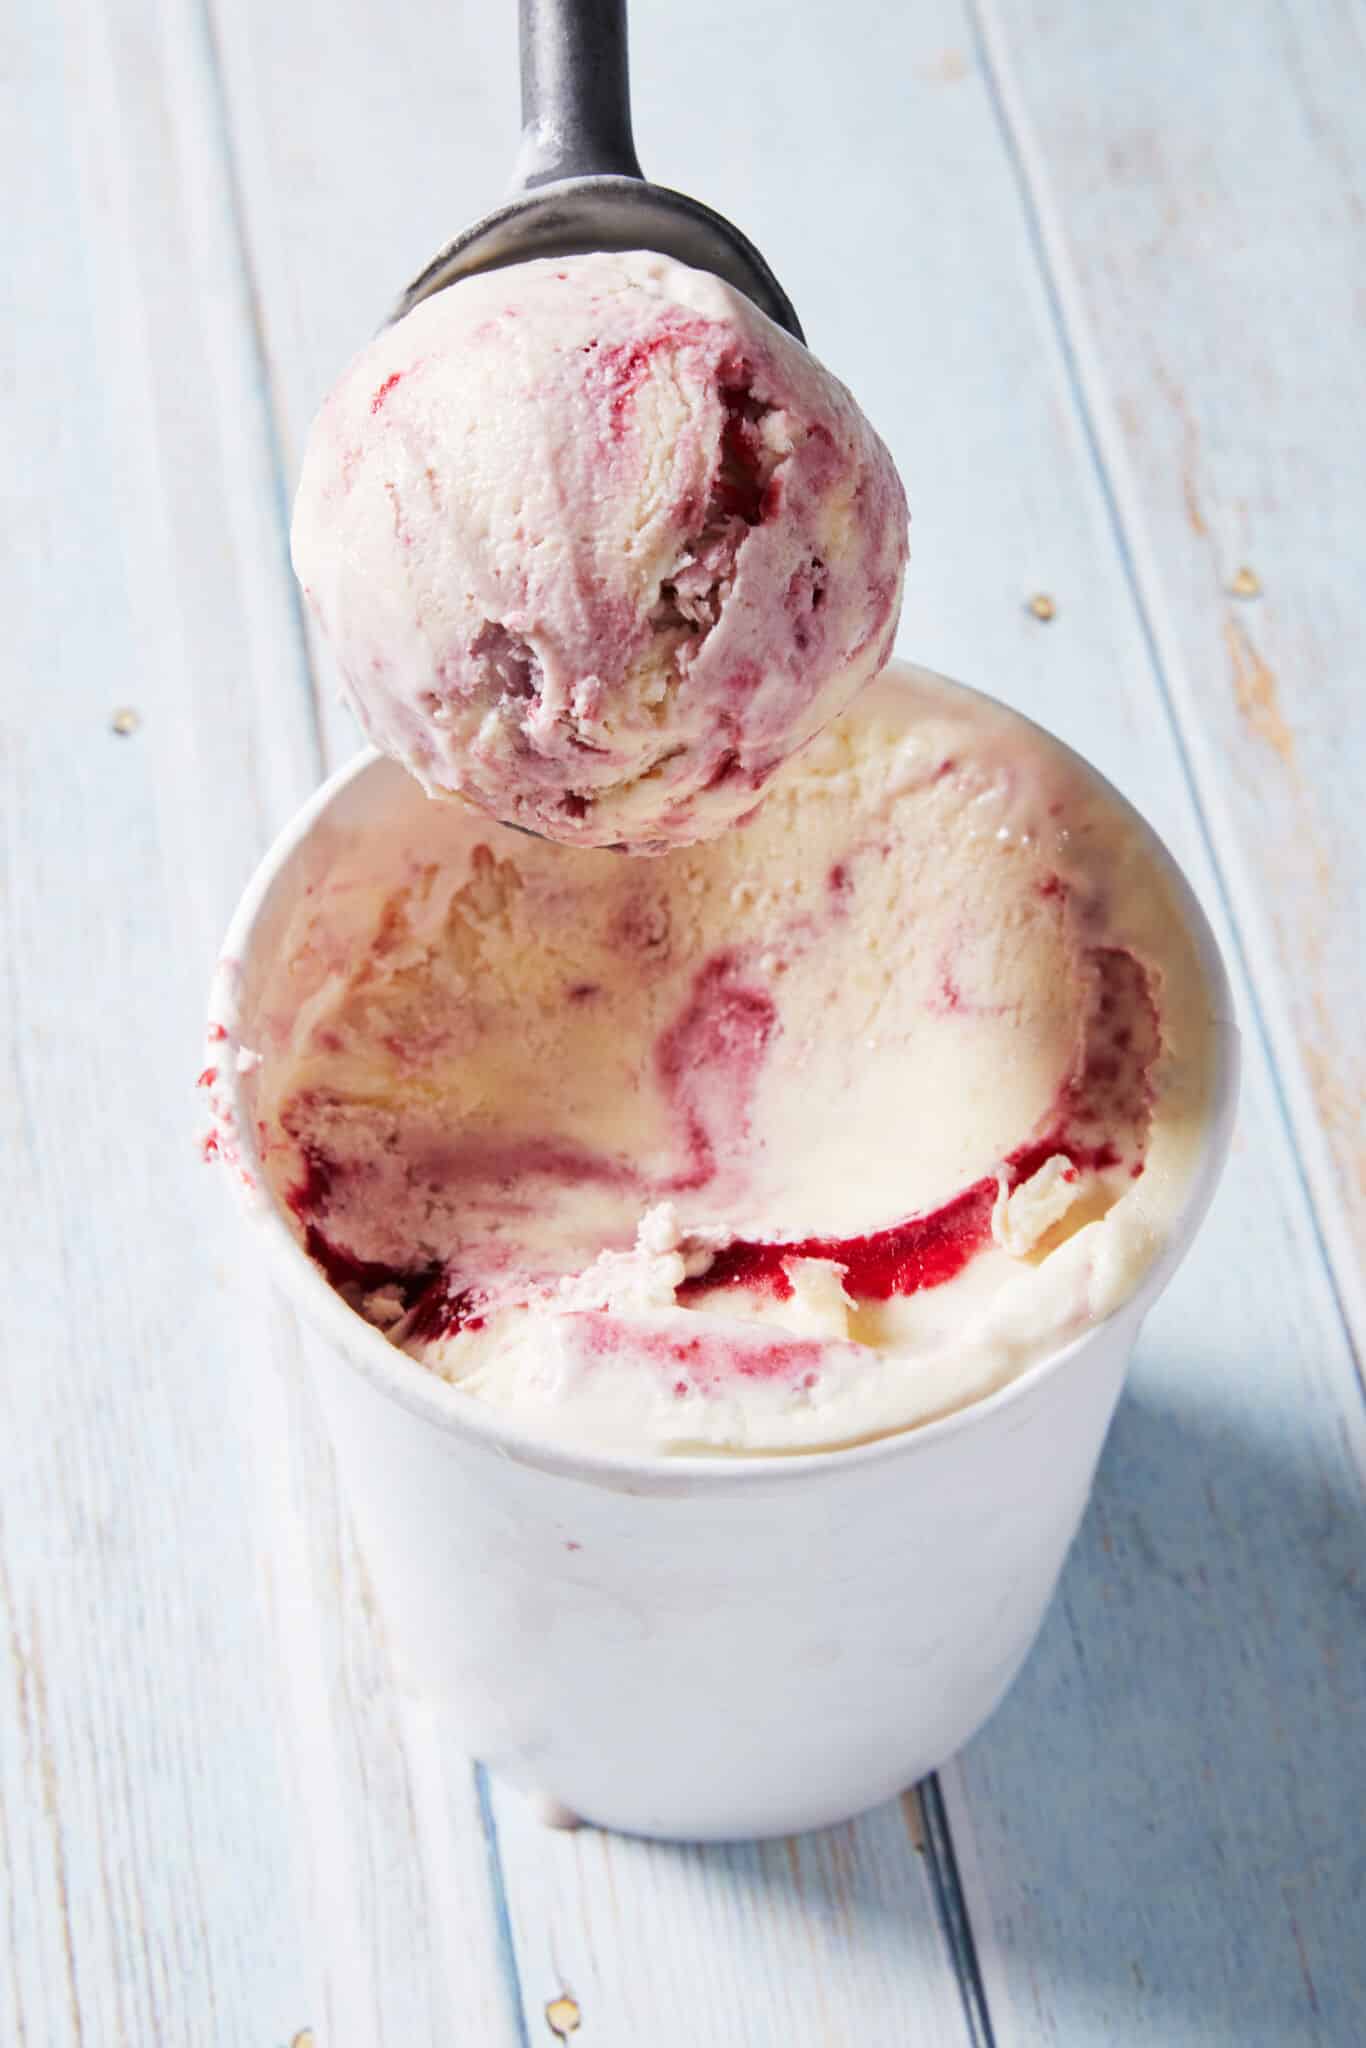 A close-up shot at a scoop of the Raspberry Ripple Flavor No-Churn Artisanal Ice Cream shows its thick and creamy consistency.